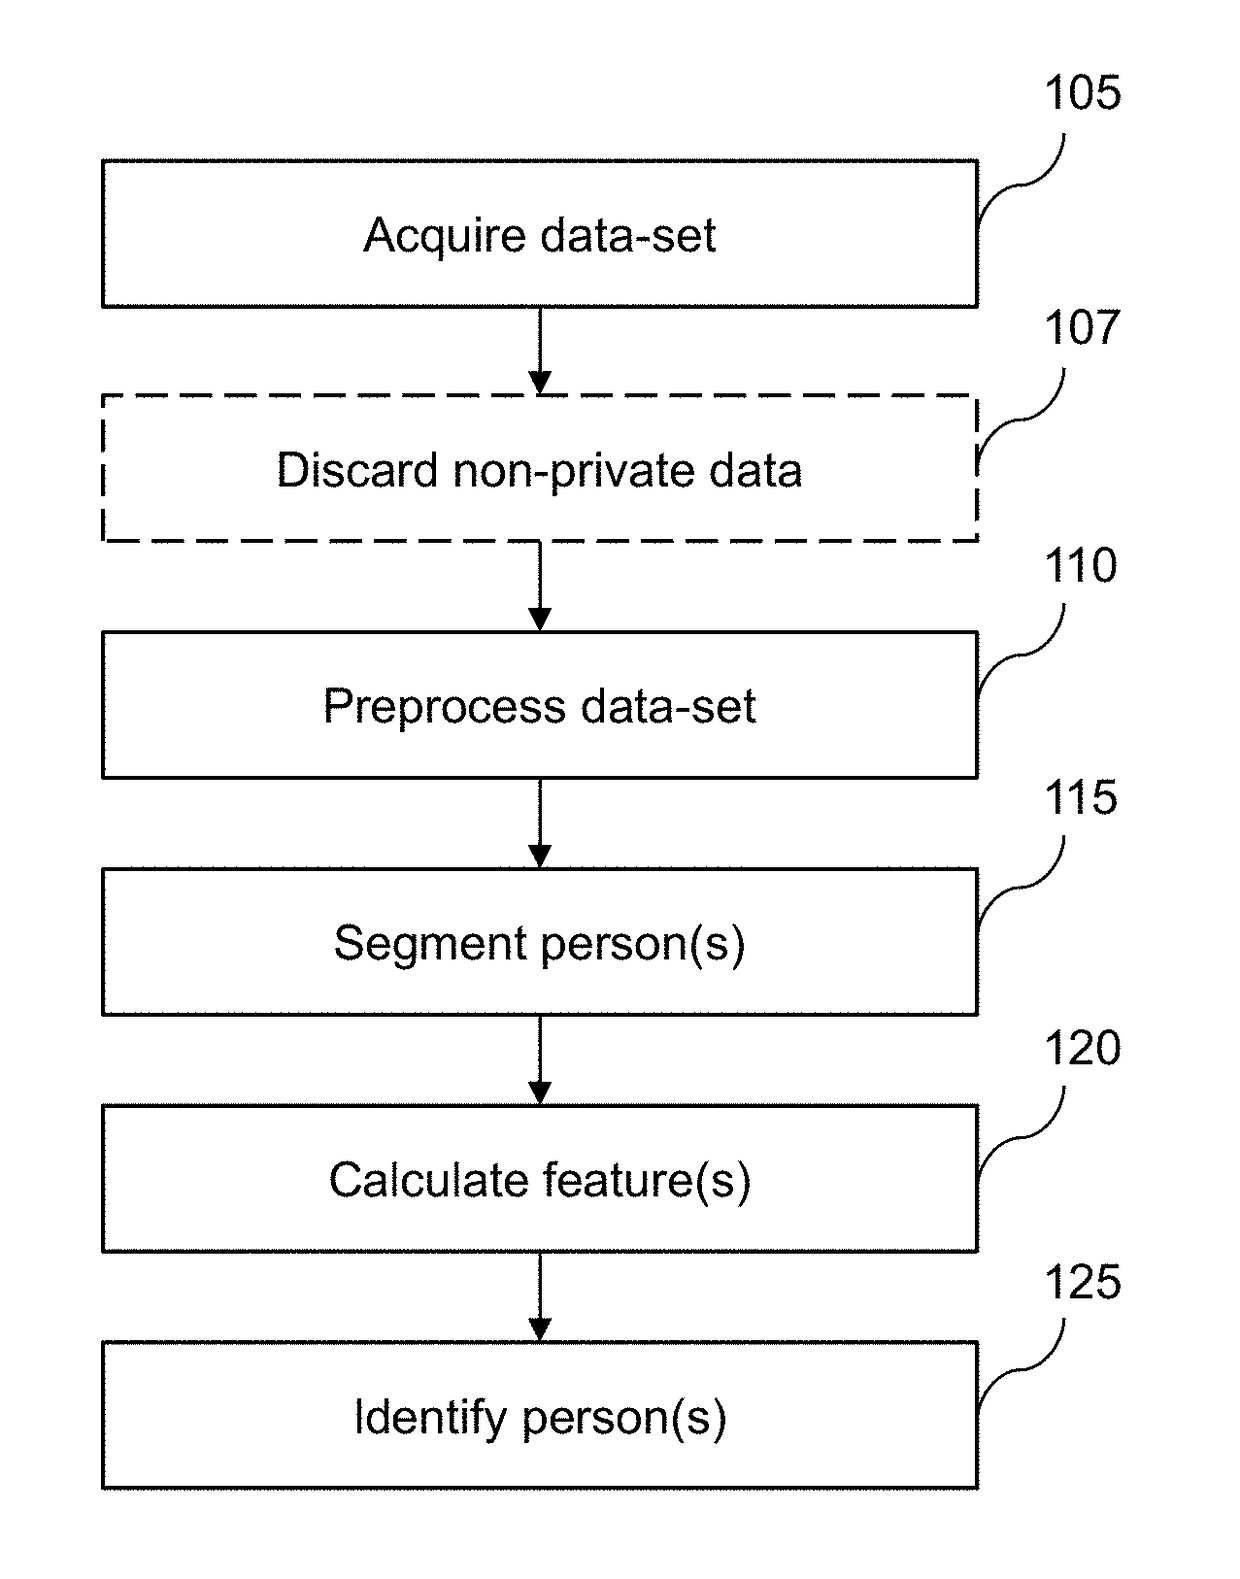 Systems and methods to identify persons and/or identify and quantify pain, fatigue, mood, and intent with protection of privacy